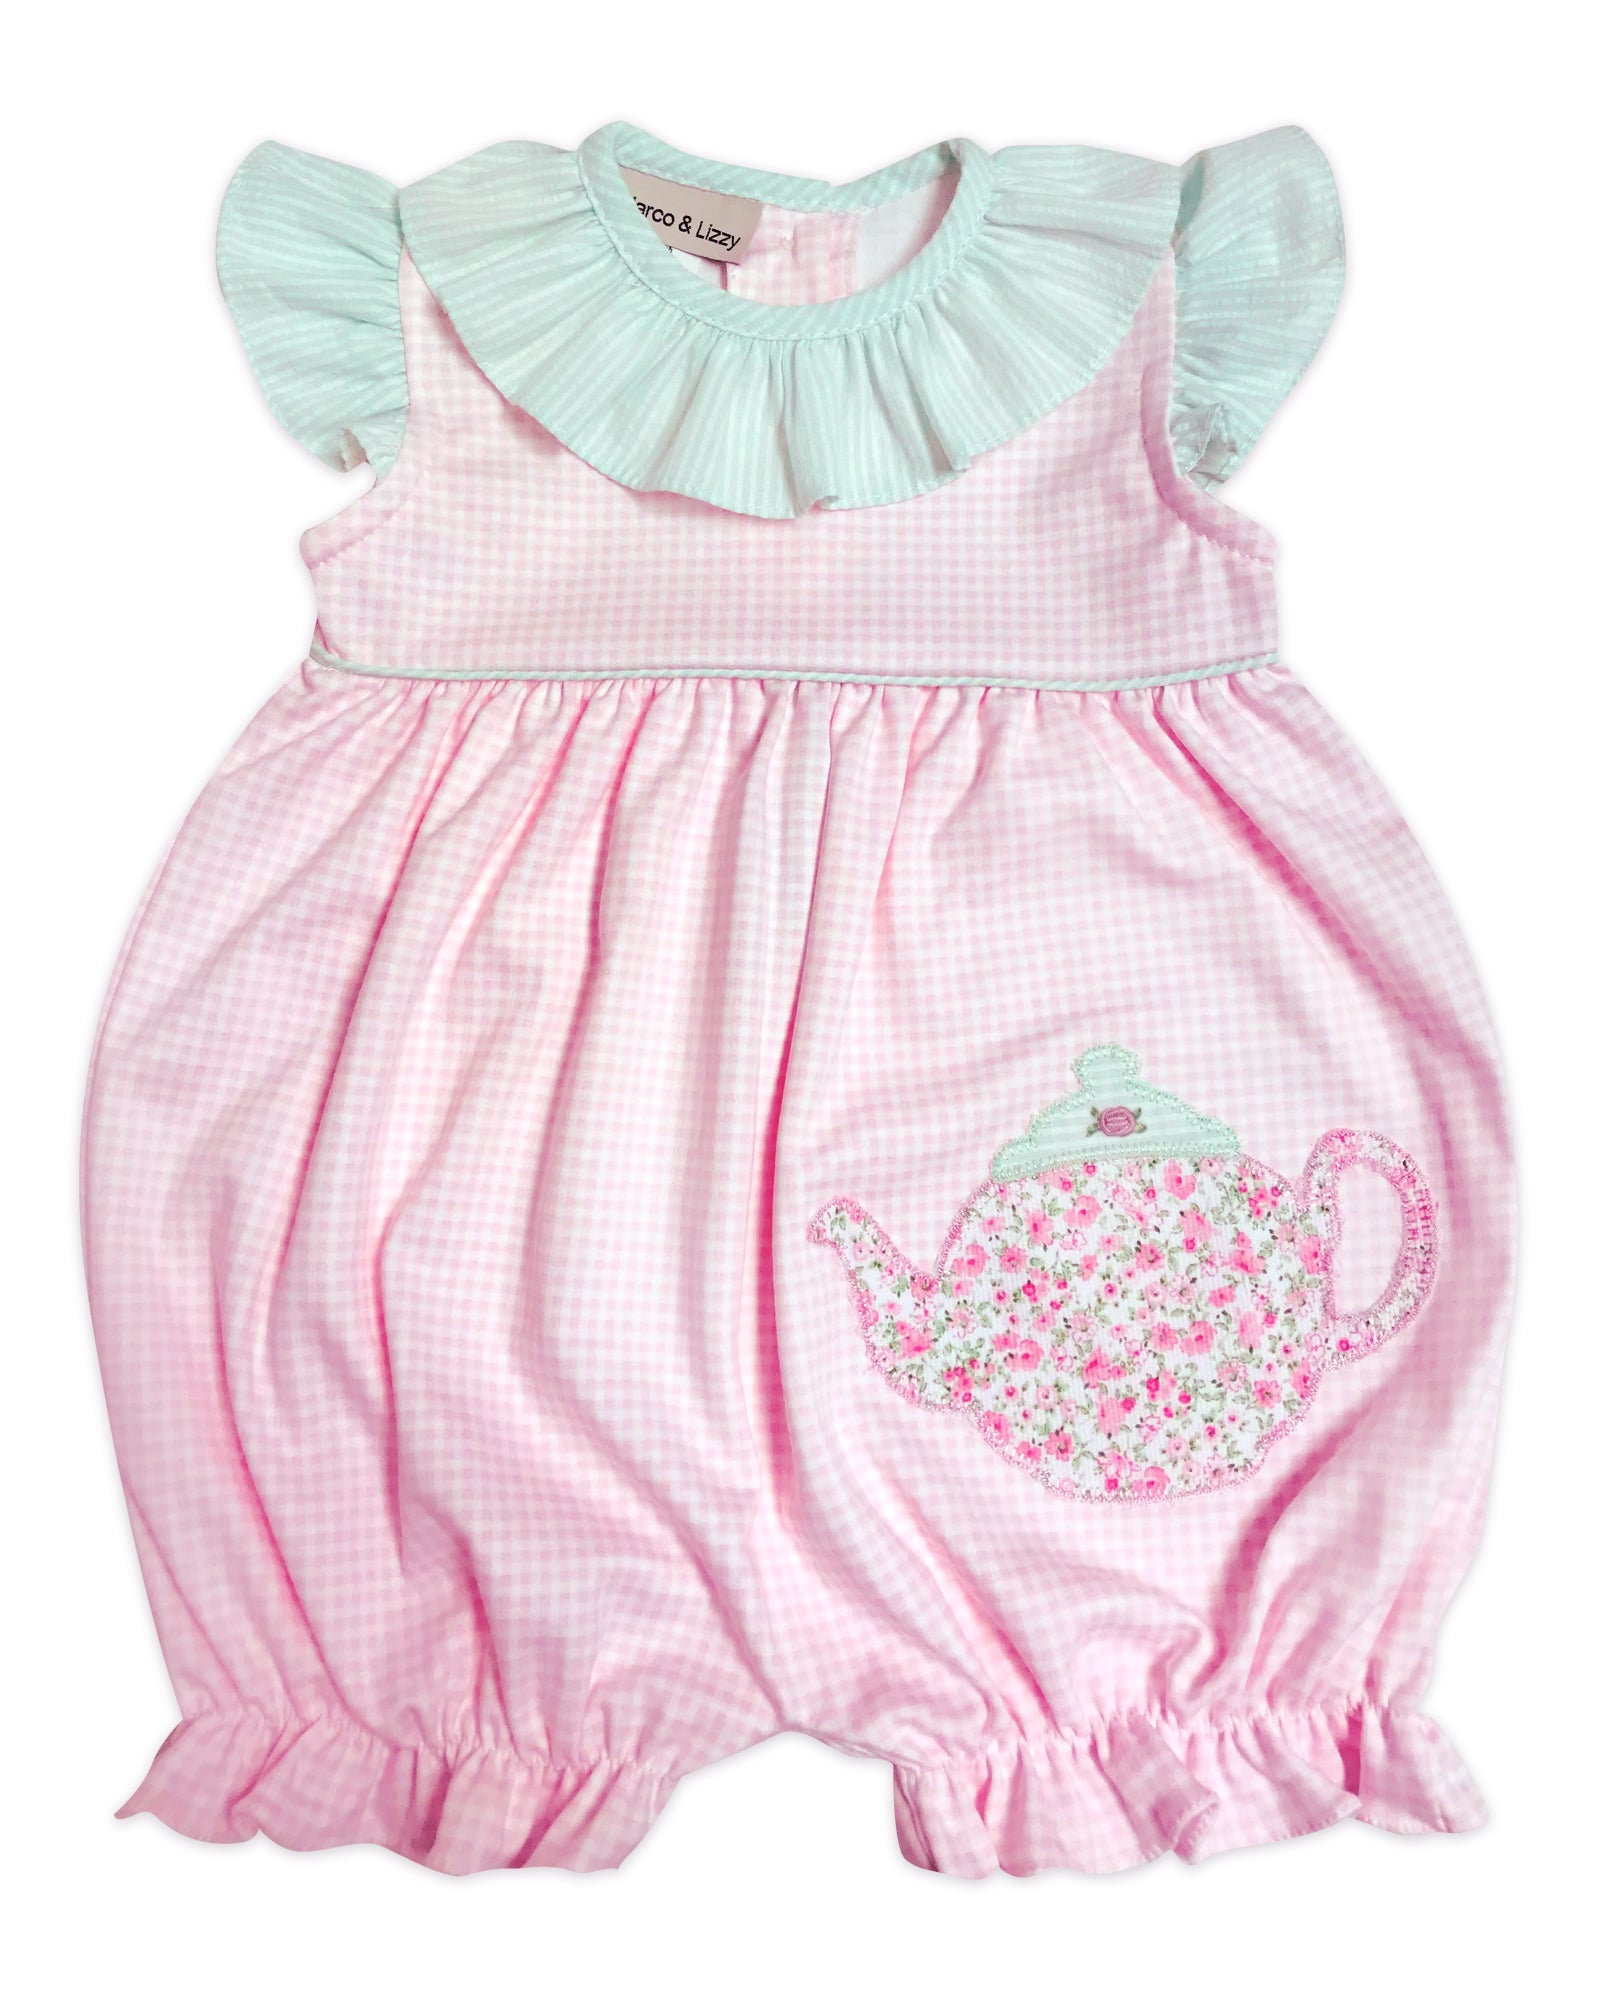 Buy Classic Baby Girl Romper - Marco and Lizzy